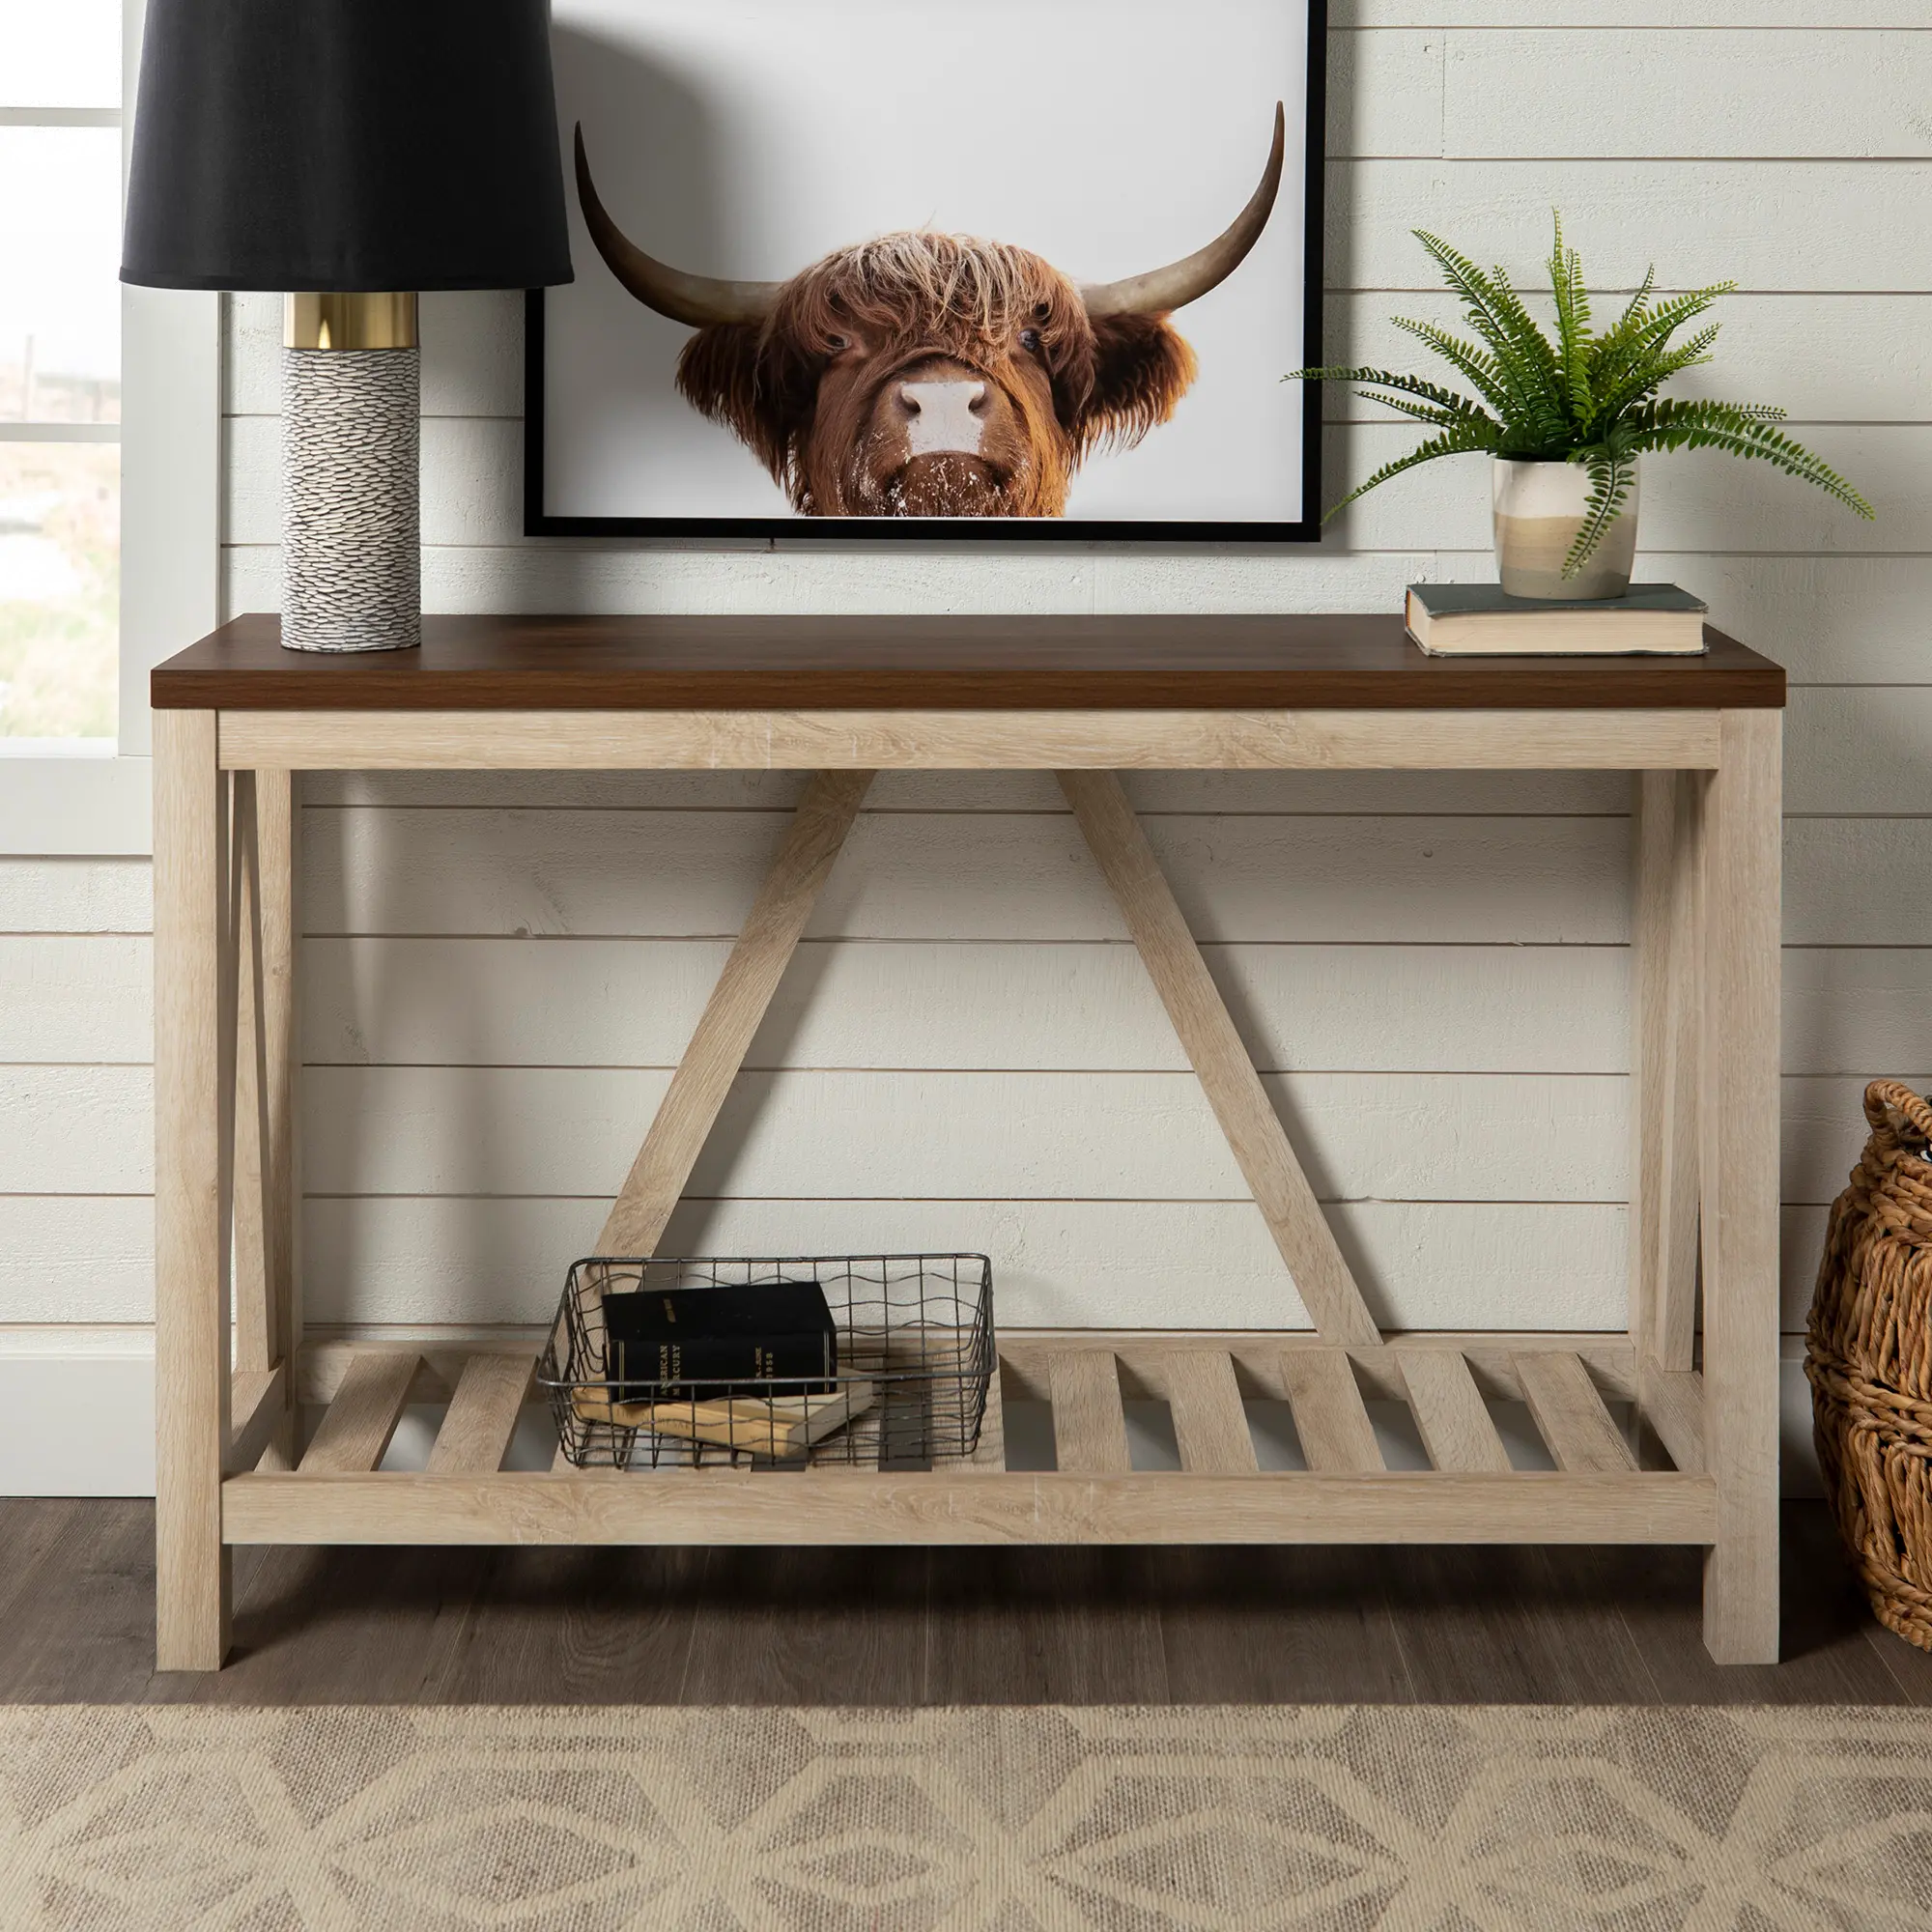 https://static.rcwilley.com/products/111699207/52-Inch-Dark-Walnut-and-White-Oak-Rustic-Entryway-Sofa-Table---Walker-Edison-rcwilley-image1.webp